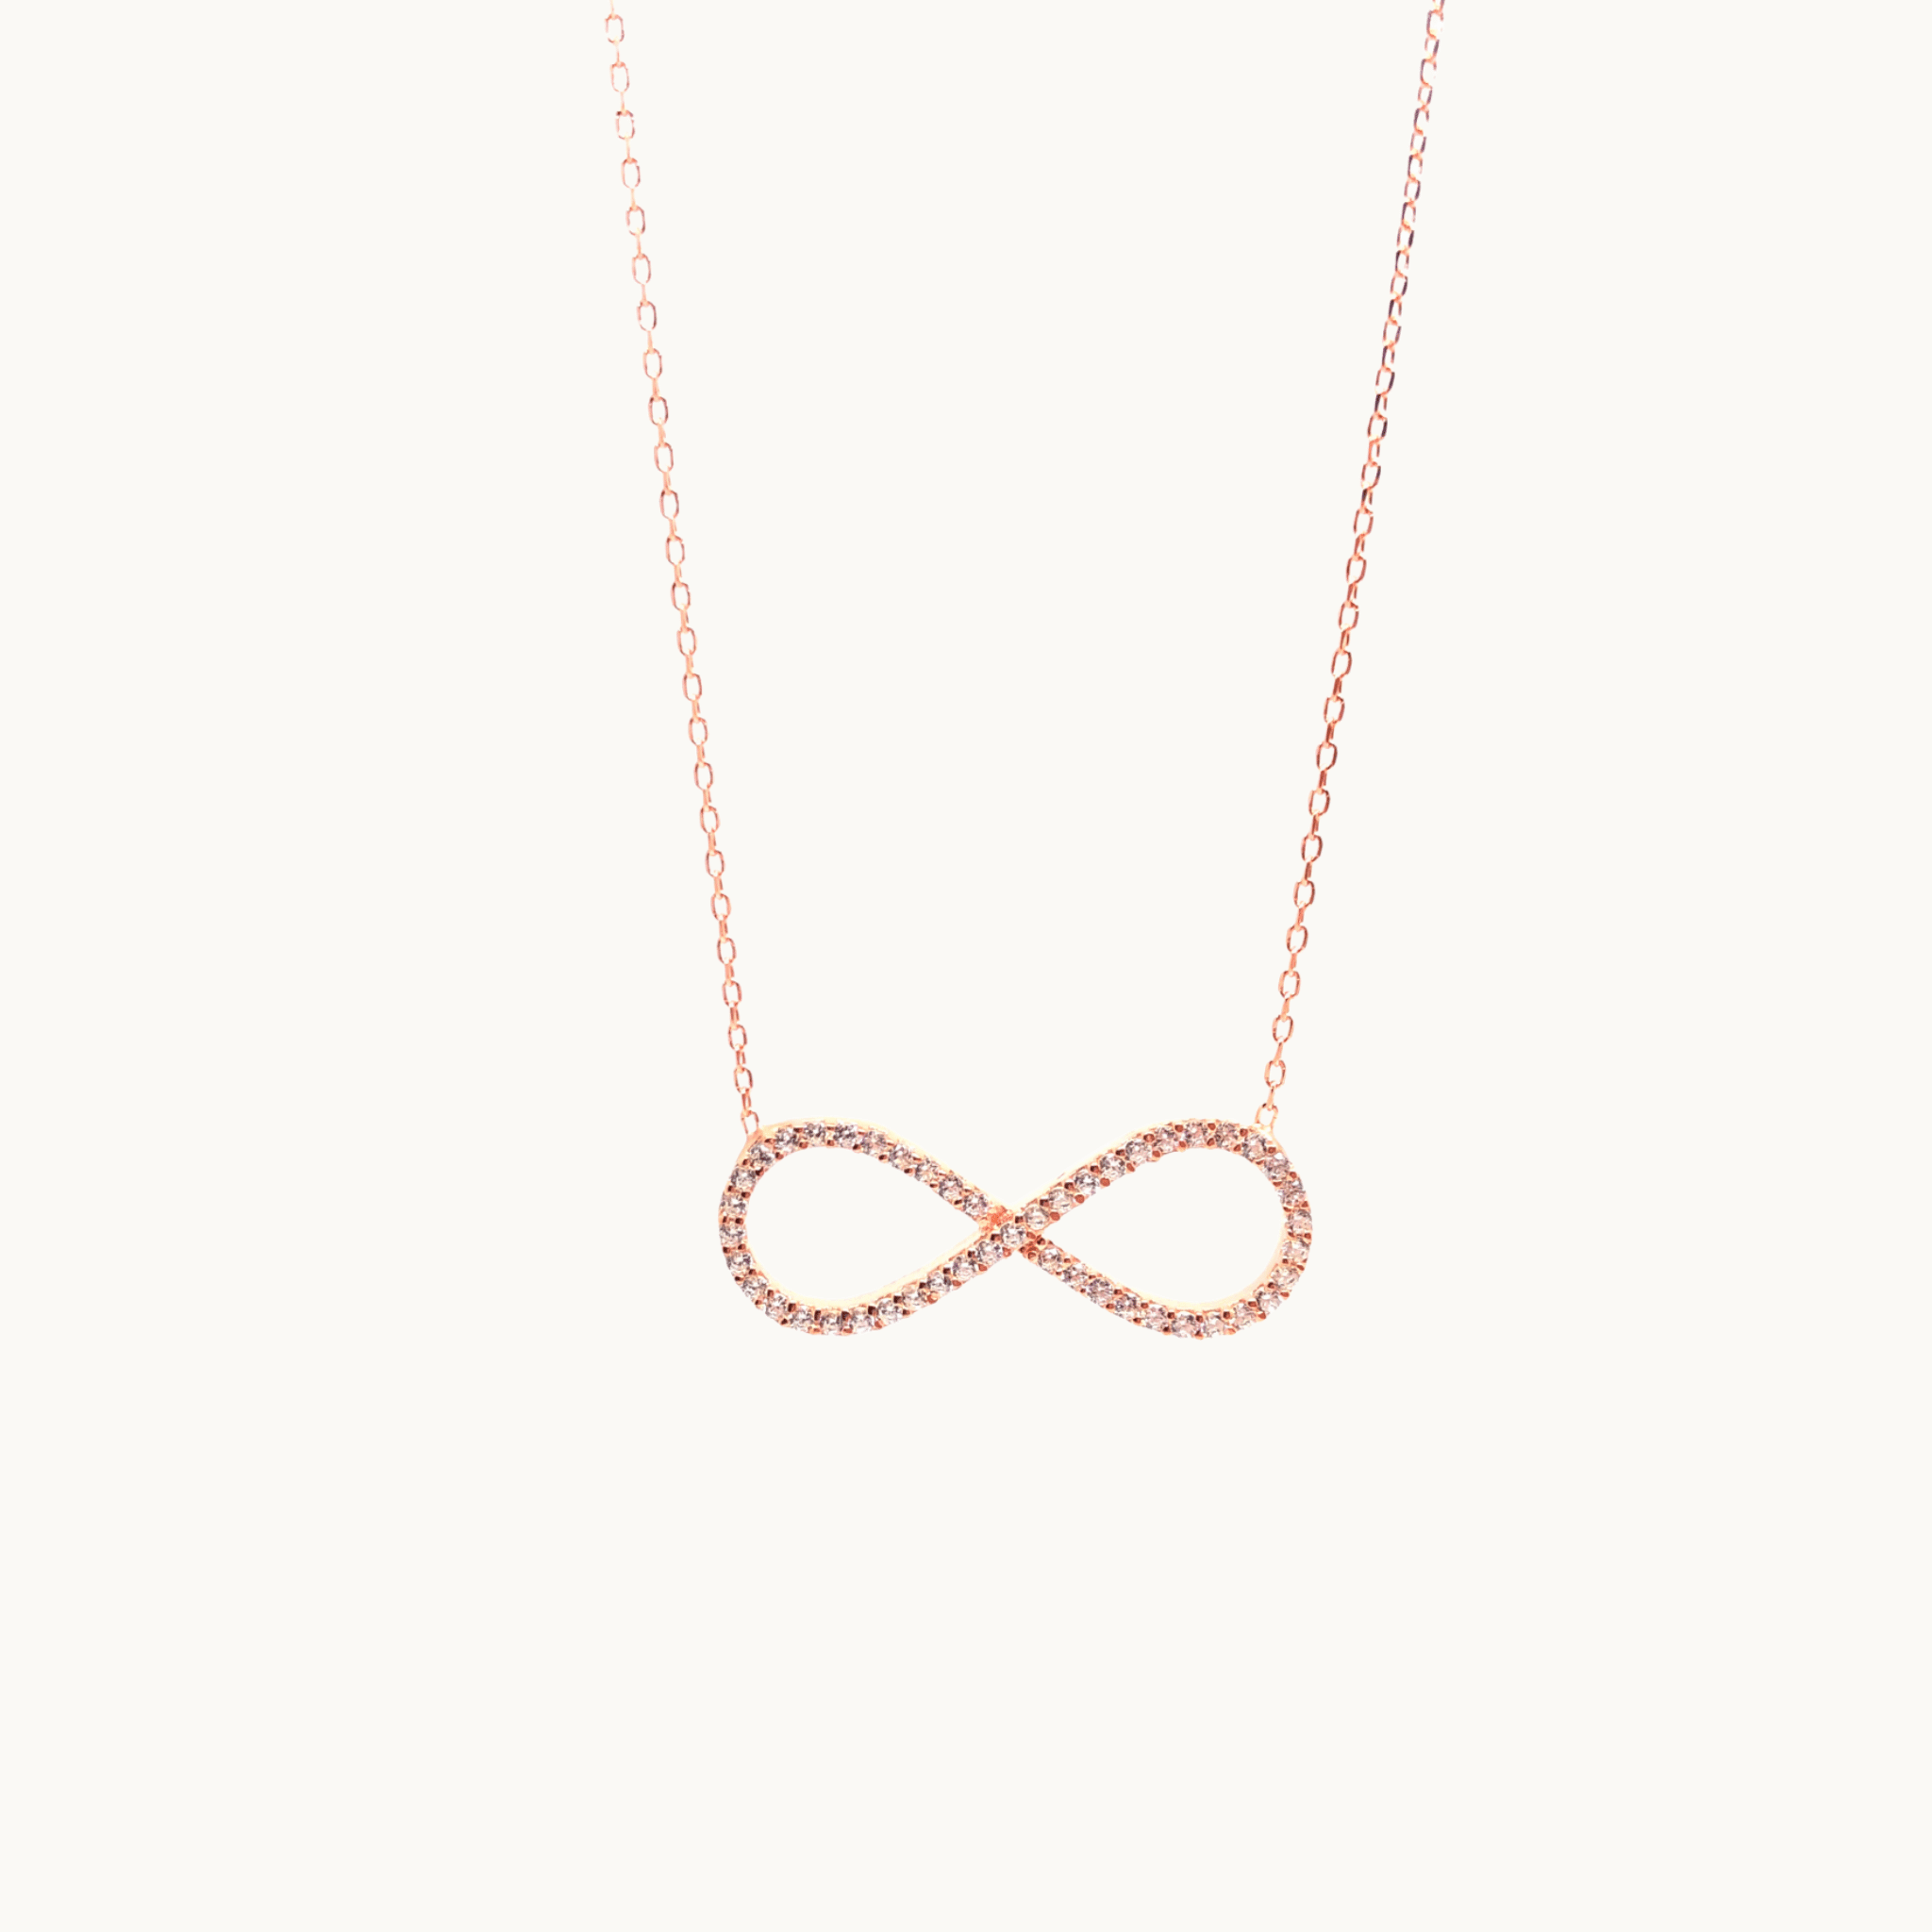 Italian Sterling Silver Infinity Necklace in Rose Gold and Crystals - Naked Nation UK